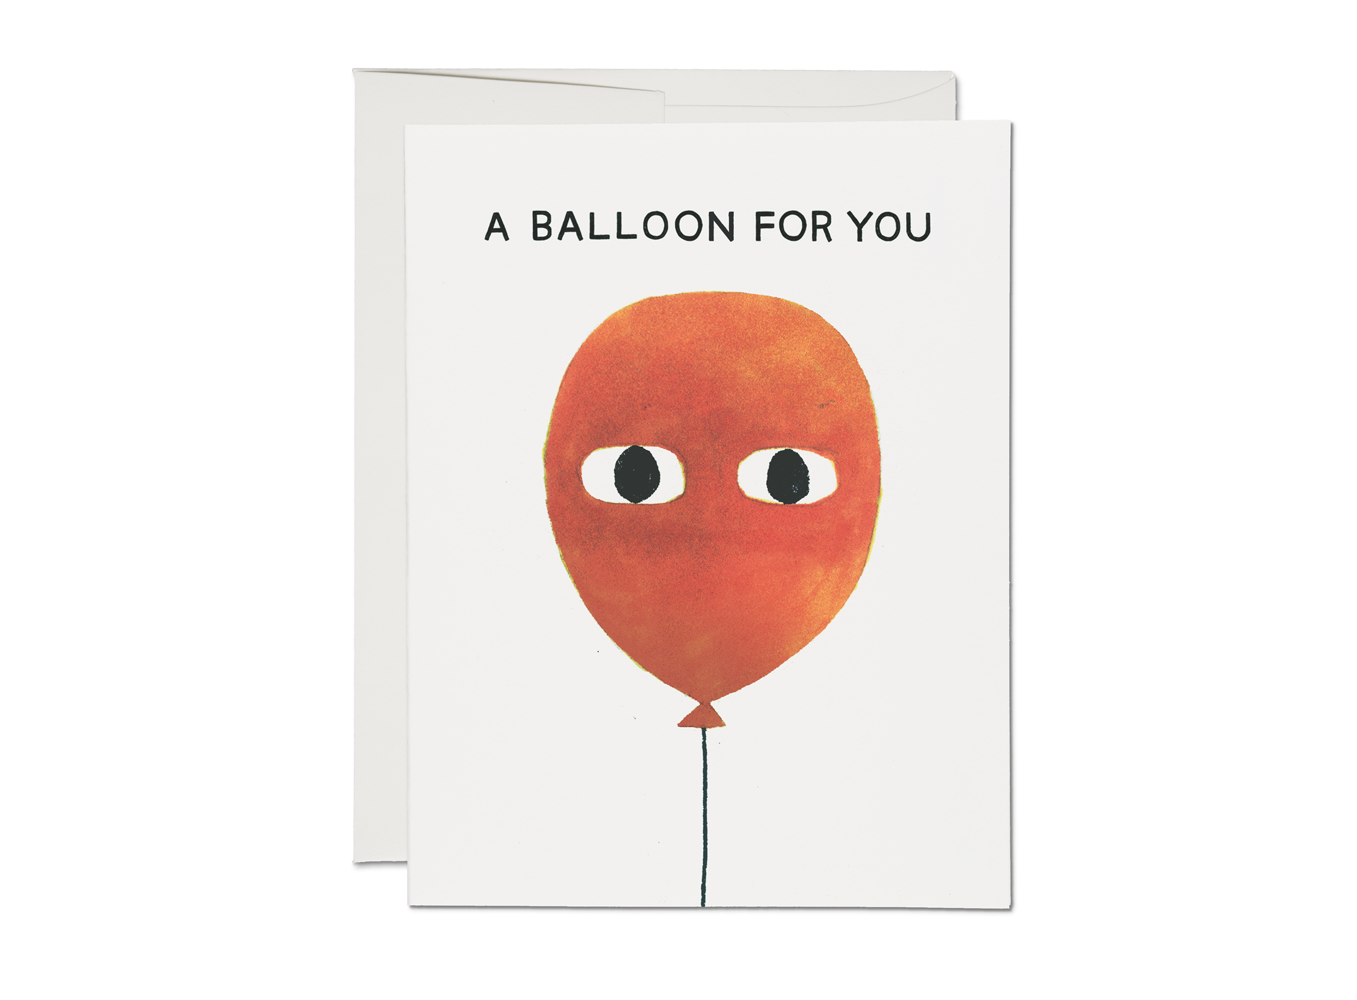 A Balloon friendship greeting card - The Crowd Went Wild